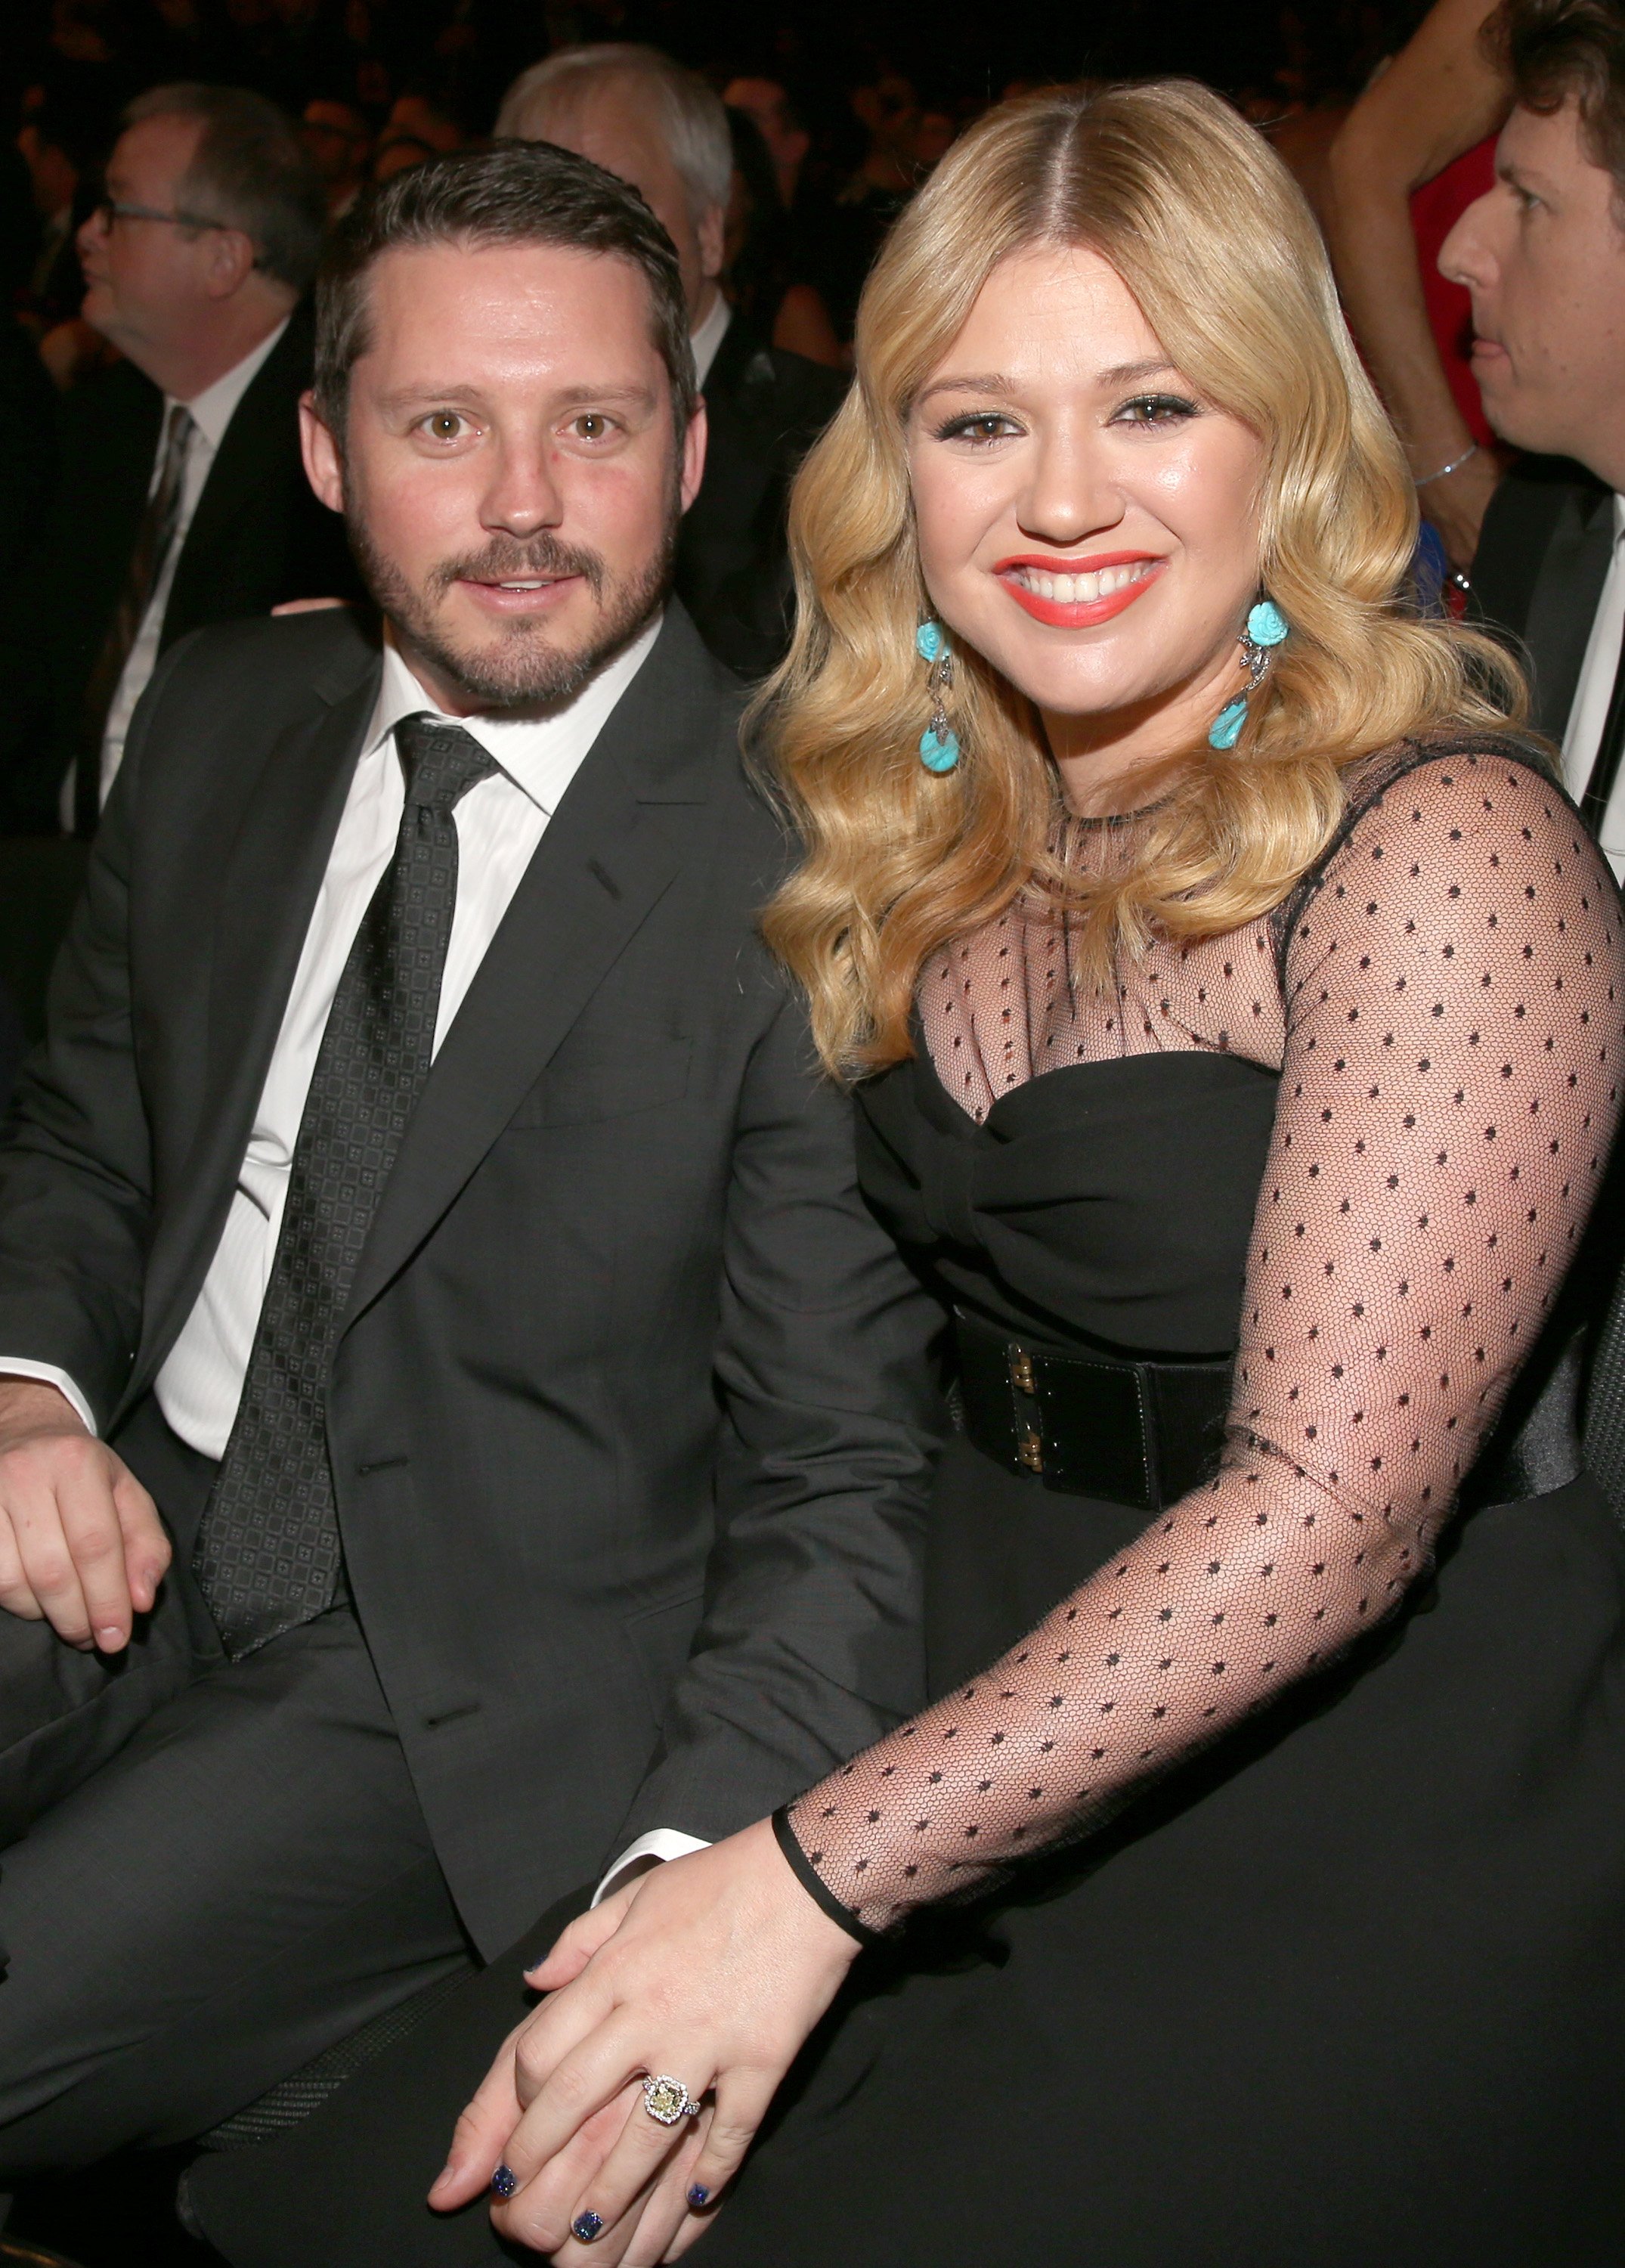 Kelly Clarkson and Brandon Blackstock at the Grammys in California 2013. | Source: Getty Images 